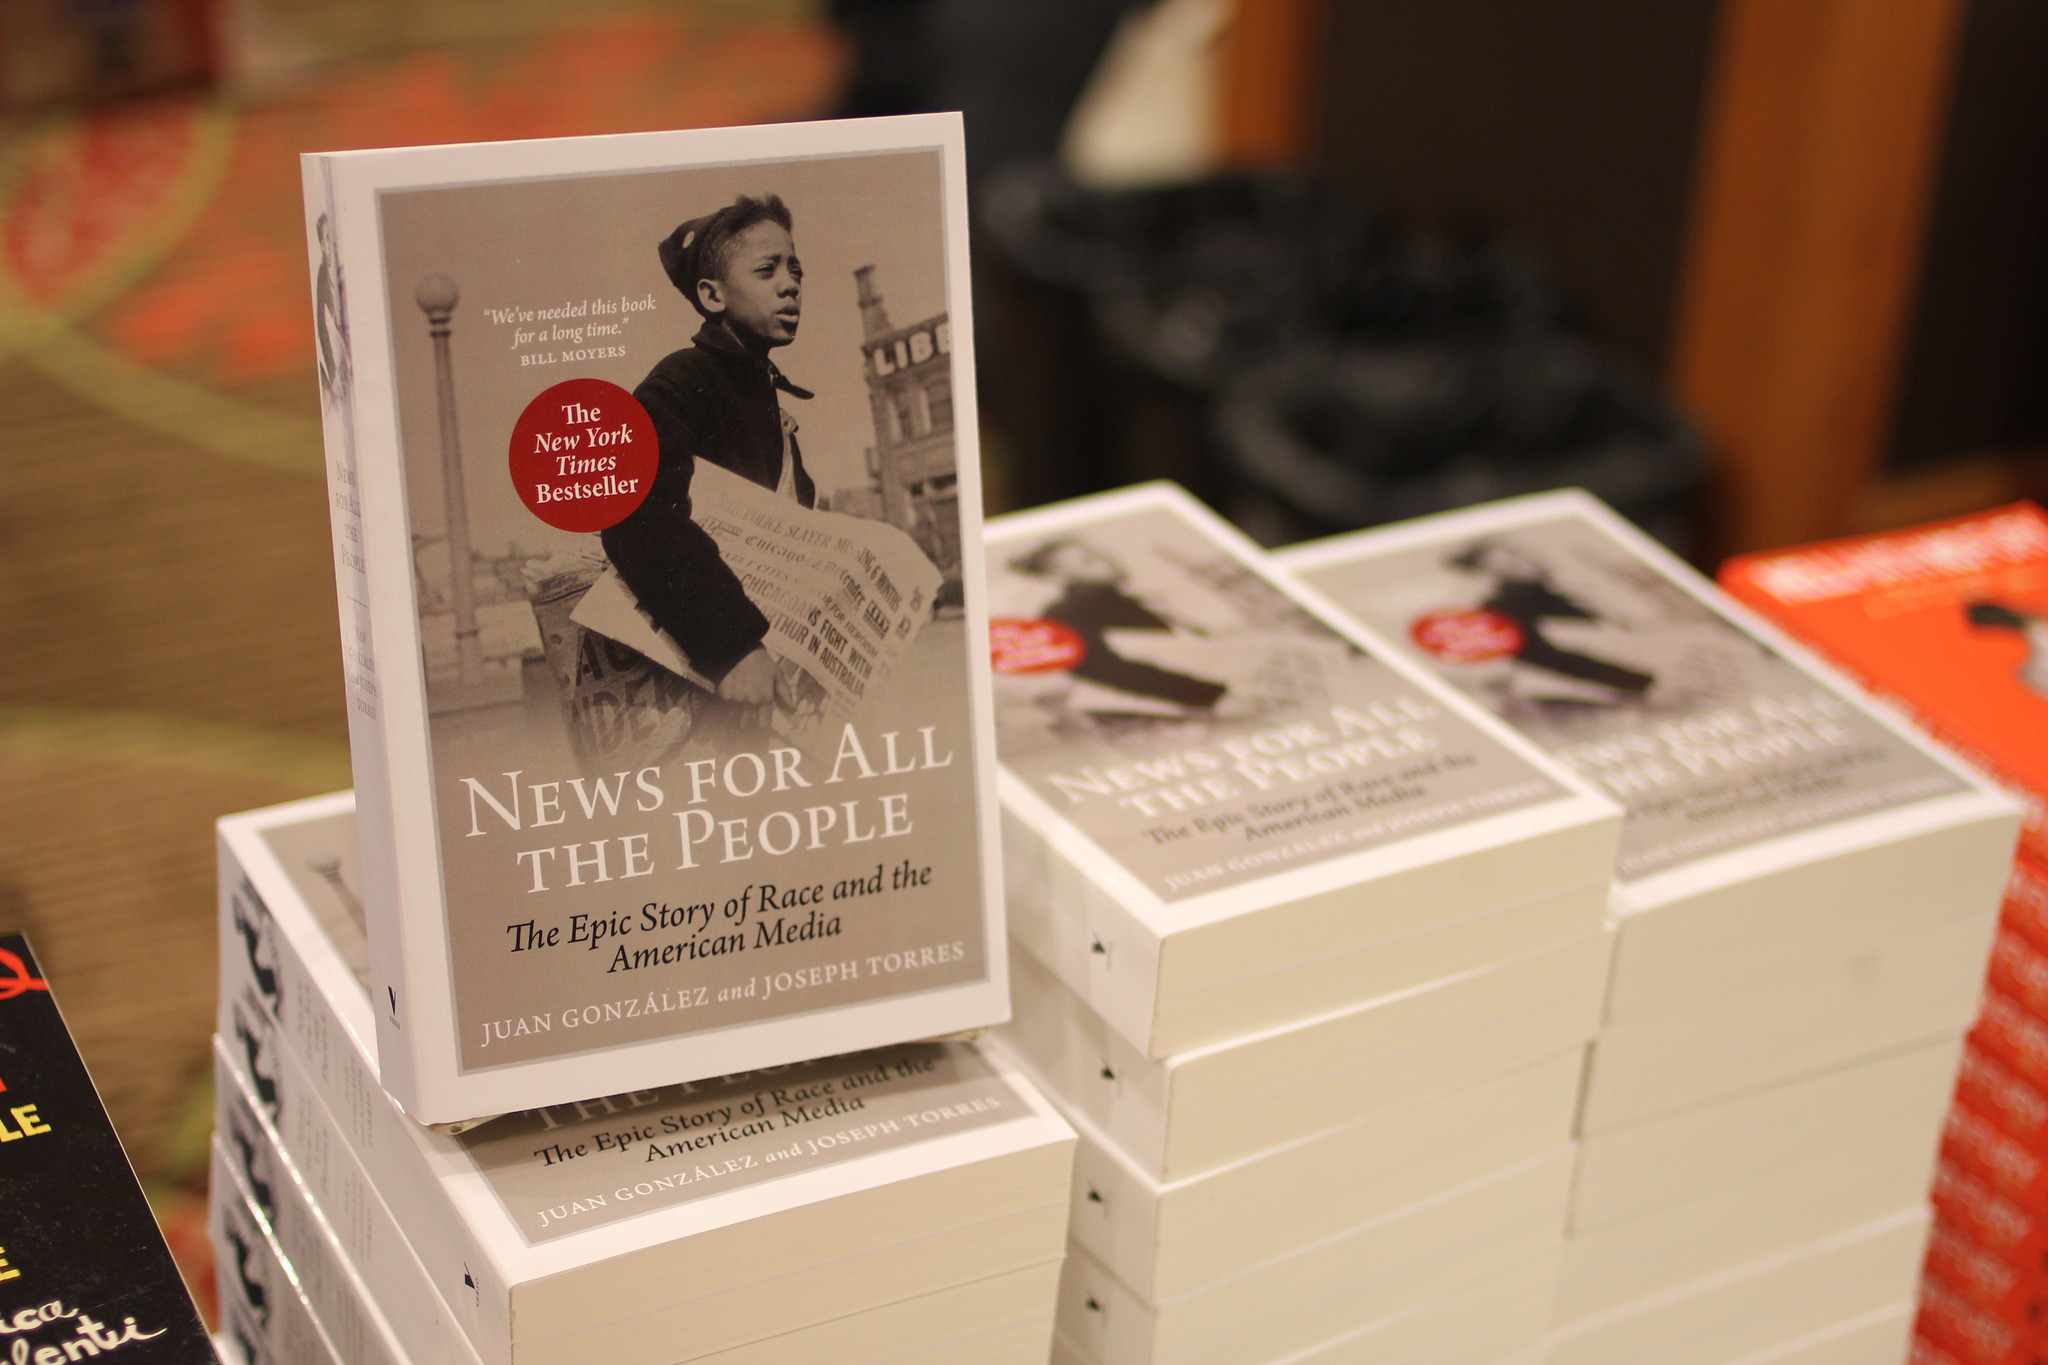 Stacks of the book "News for All the People"